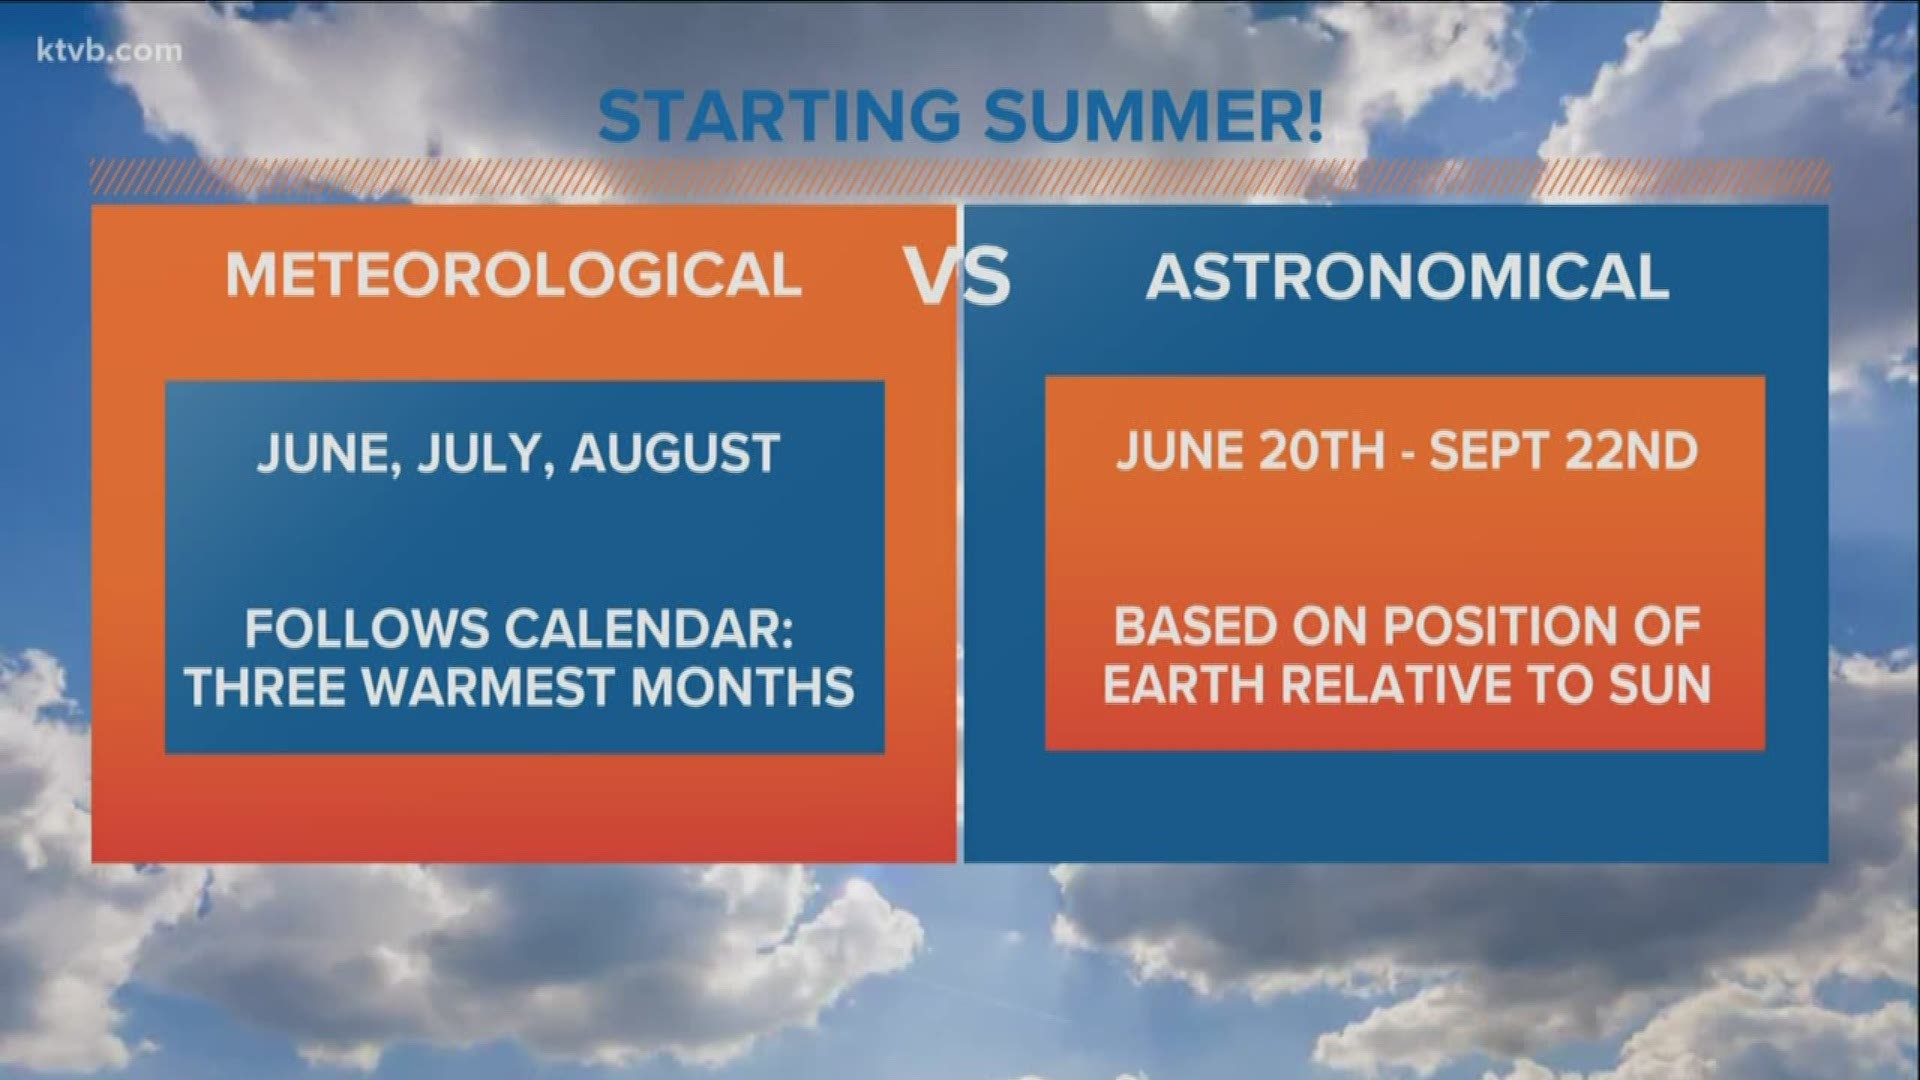 What's the difference between meteorological and astronomical summer